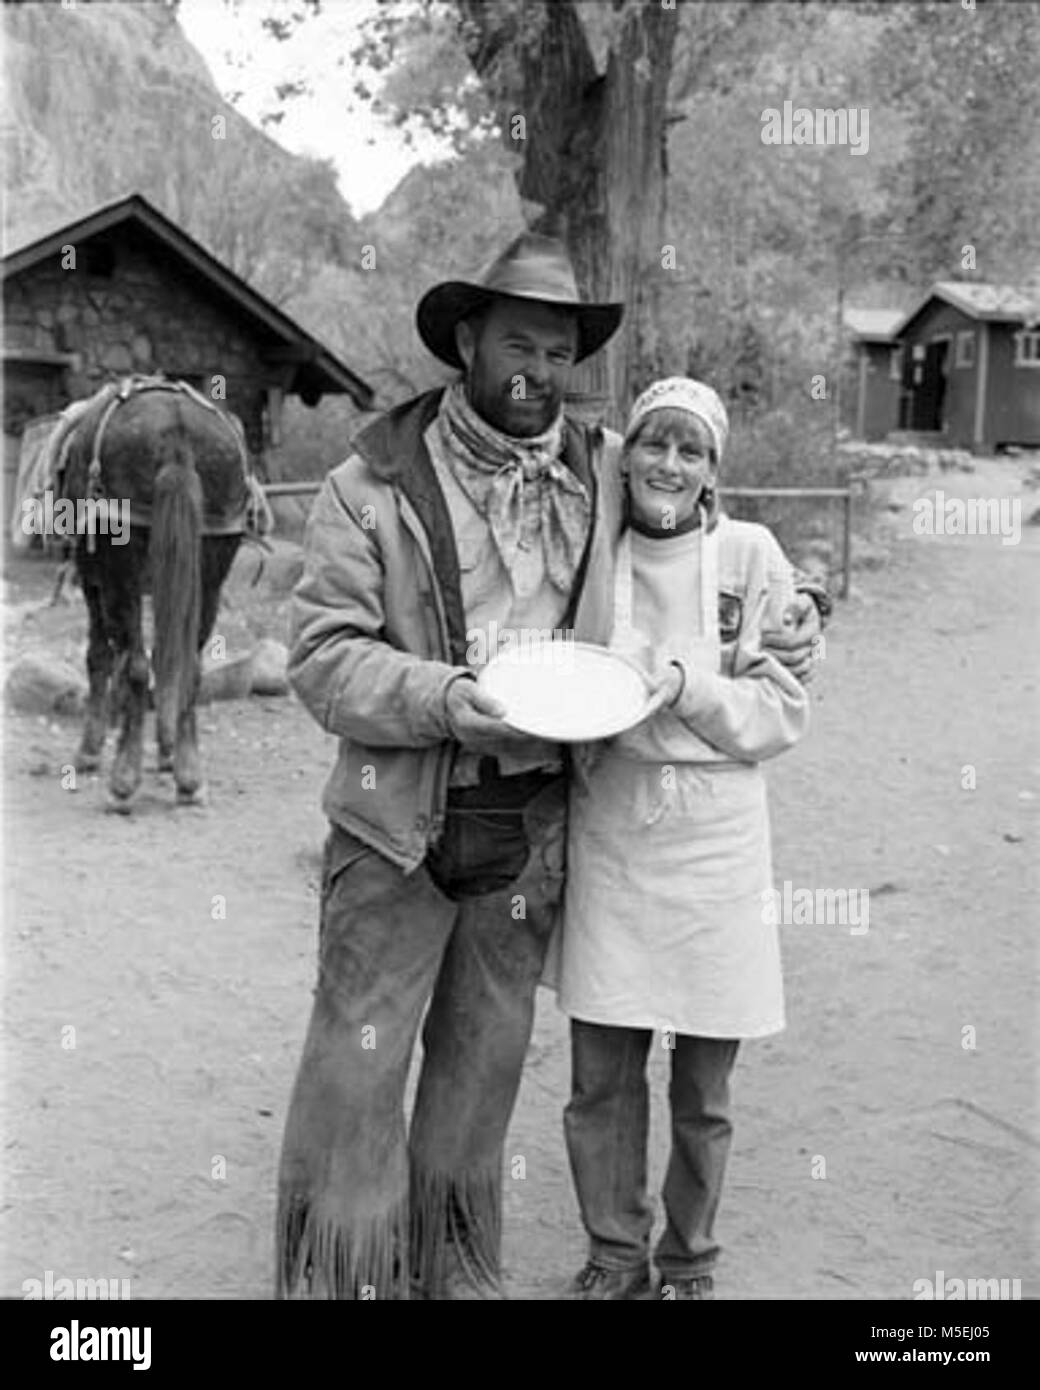 Grand Canyon Historic - Phantom Ranch Employees   PHANTOM RANCH STAFF, ROSS KNOX, XANTERRA PACKER, AND ELAINE MUIR-TRACEY,  SPOUSE OF PHANTOM RANCH MANAGER,  WARREN TRACEY HOLDING A CREAM PIE MADE IN THE PHANTOM RANCH KITCHEN. THE PHOTO WAS  TAKEN AS A JOKE, TO SUGGEST IT WOULD BE THROWN AT LIVERY MANAGER, RON CLAYTON - AS A REPARATION. Stock Photo